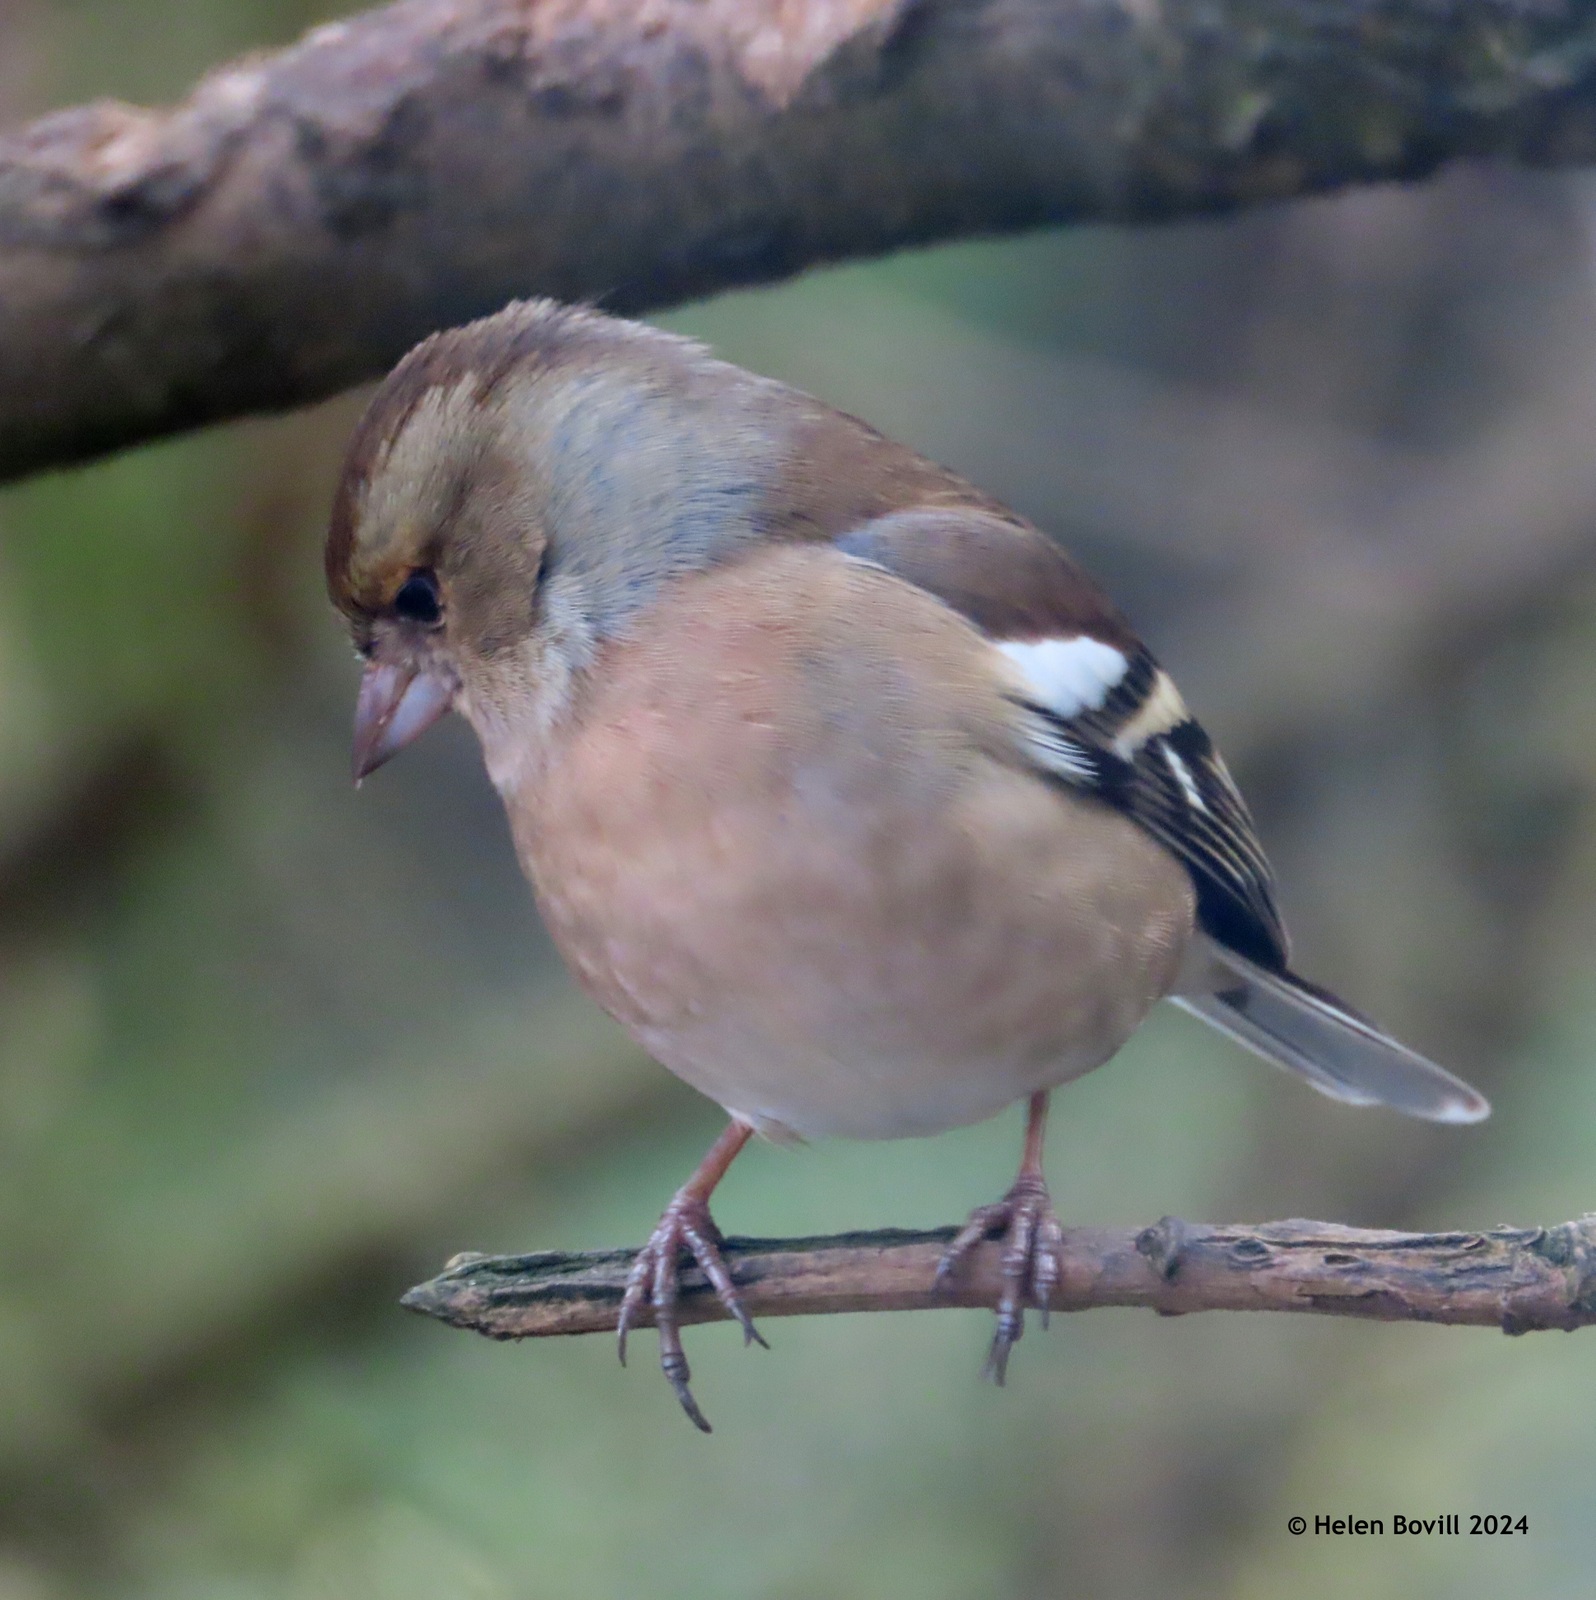 Female Chaffinch perched on a branch